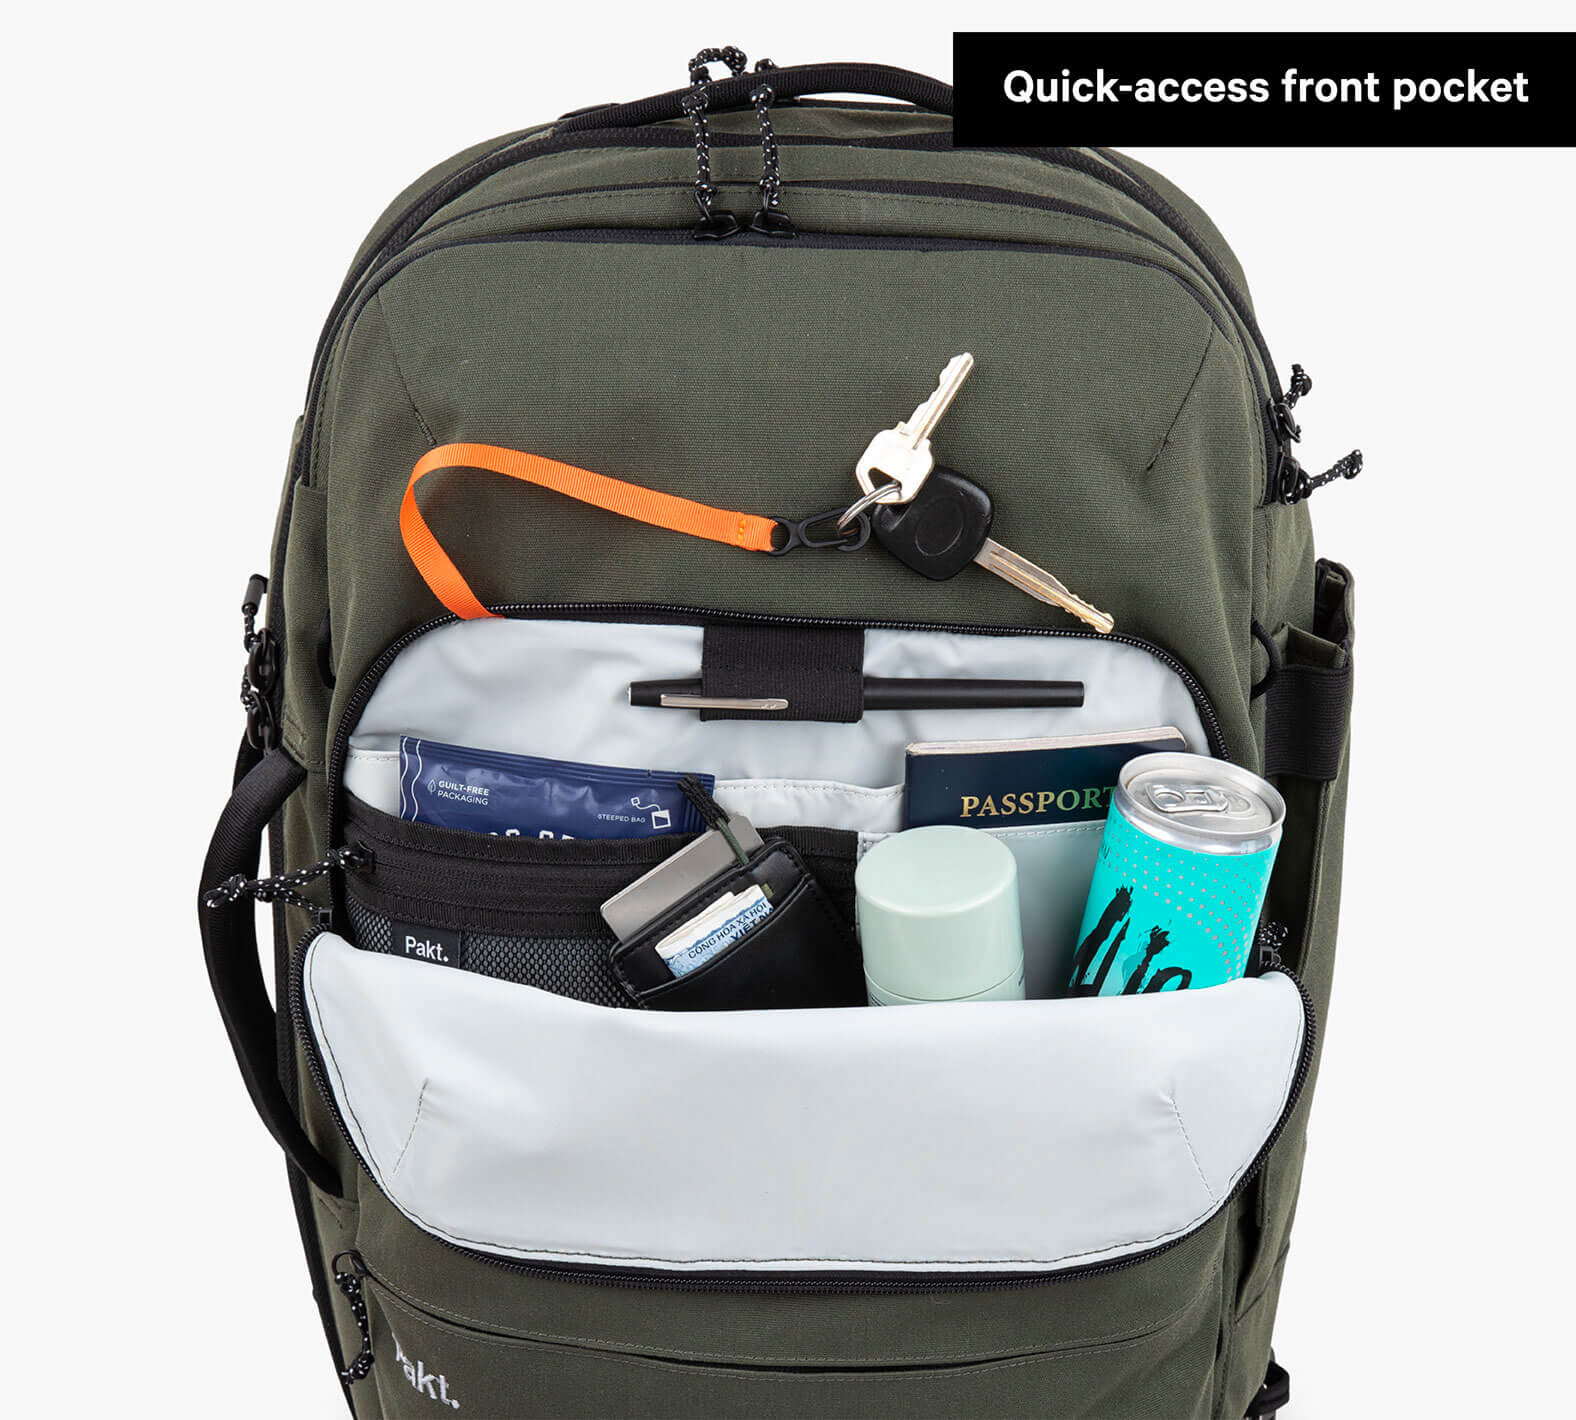 Travel Backpack Green storage space demonstrated